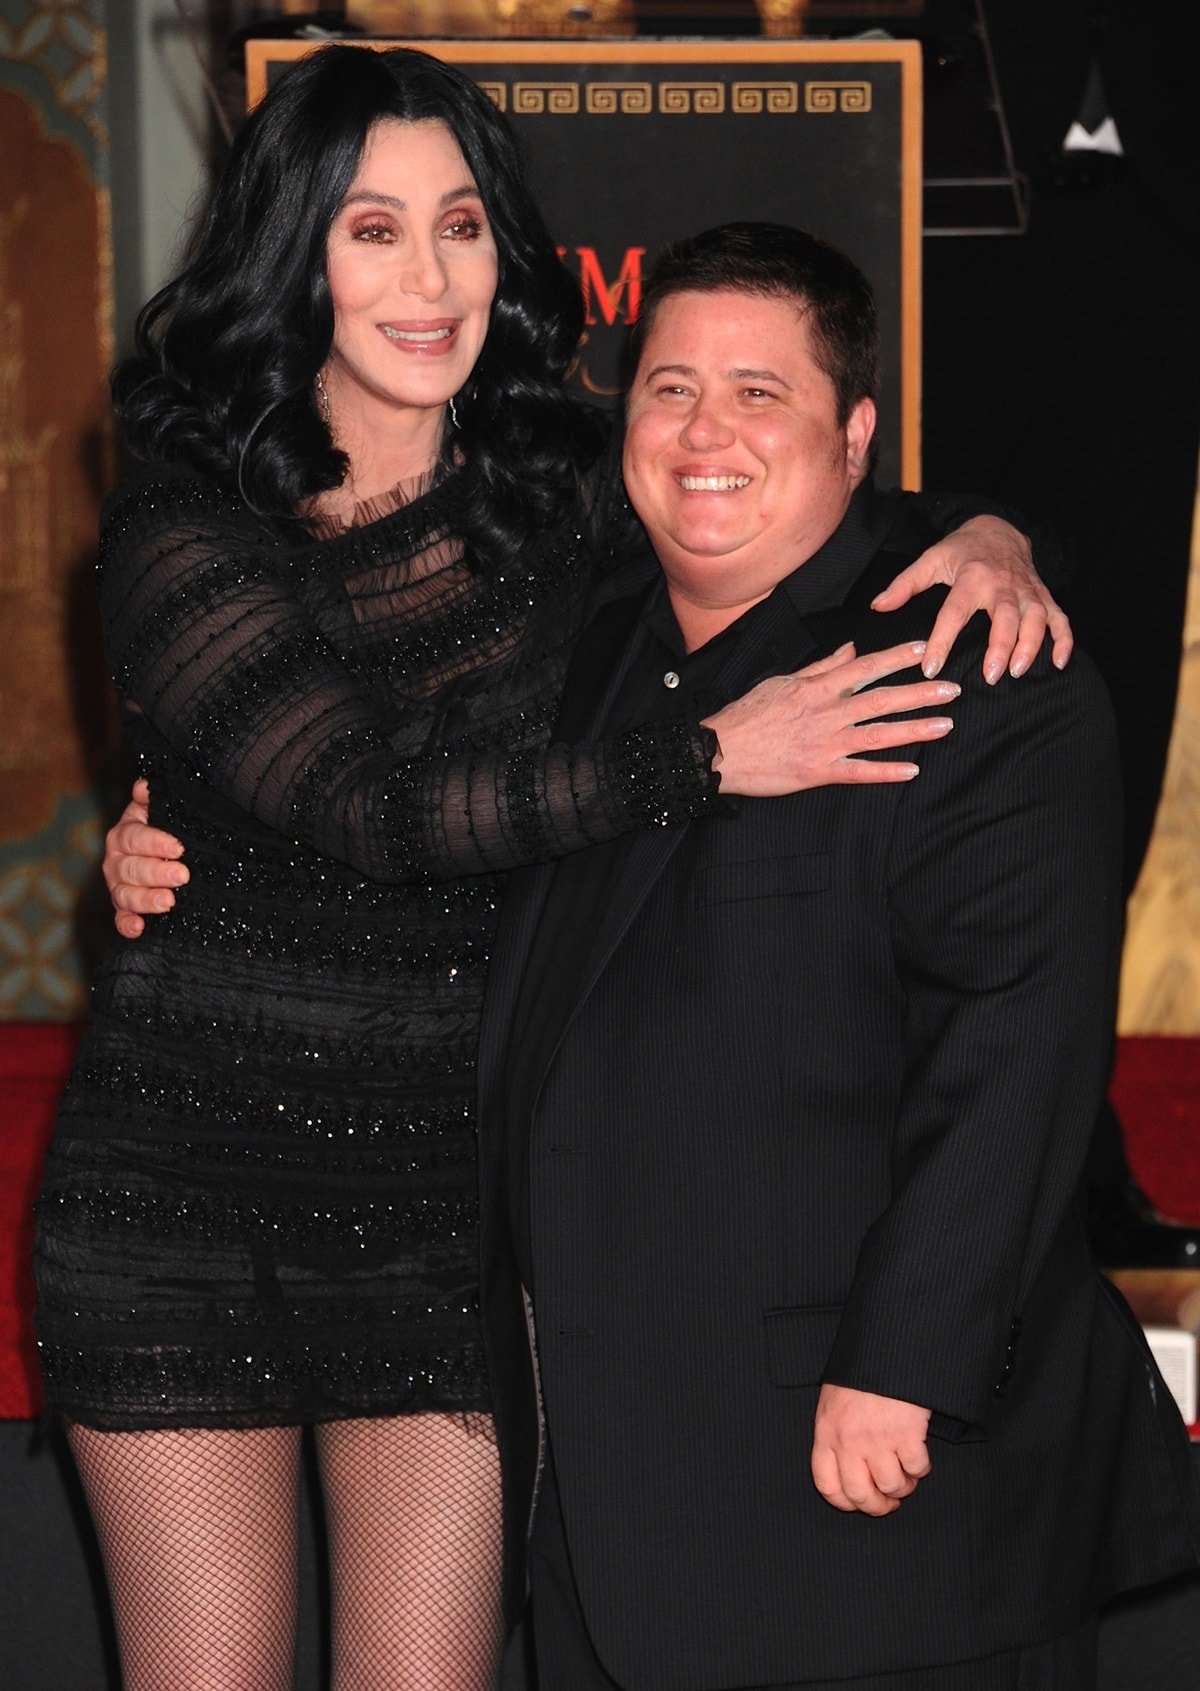 Cher is a renowned American singer and actress, while Chaz Bono is an American actor, writer, and LGBTQ+ advocate who happens to be Cher's child with Sonny Bono